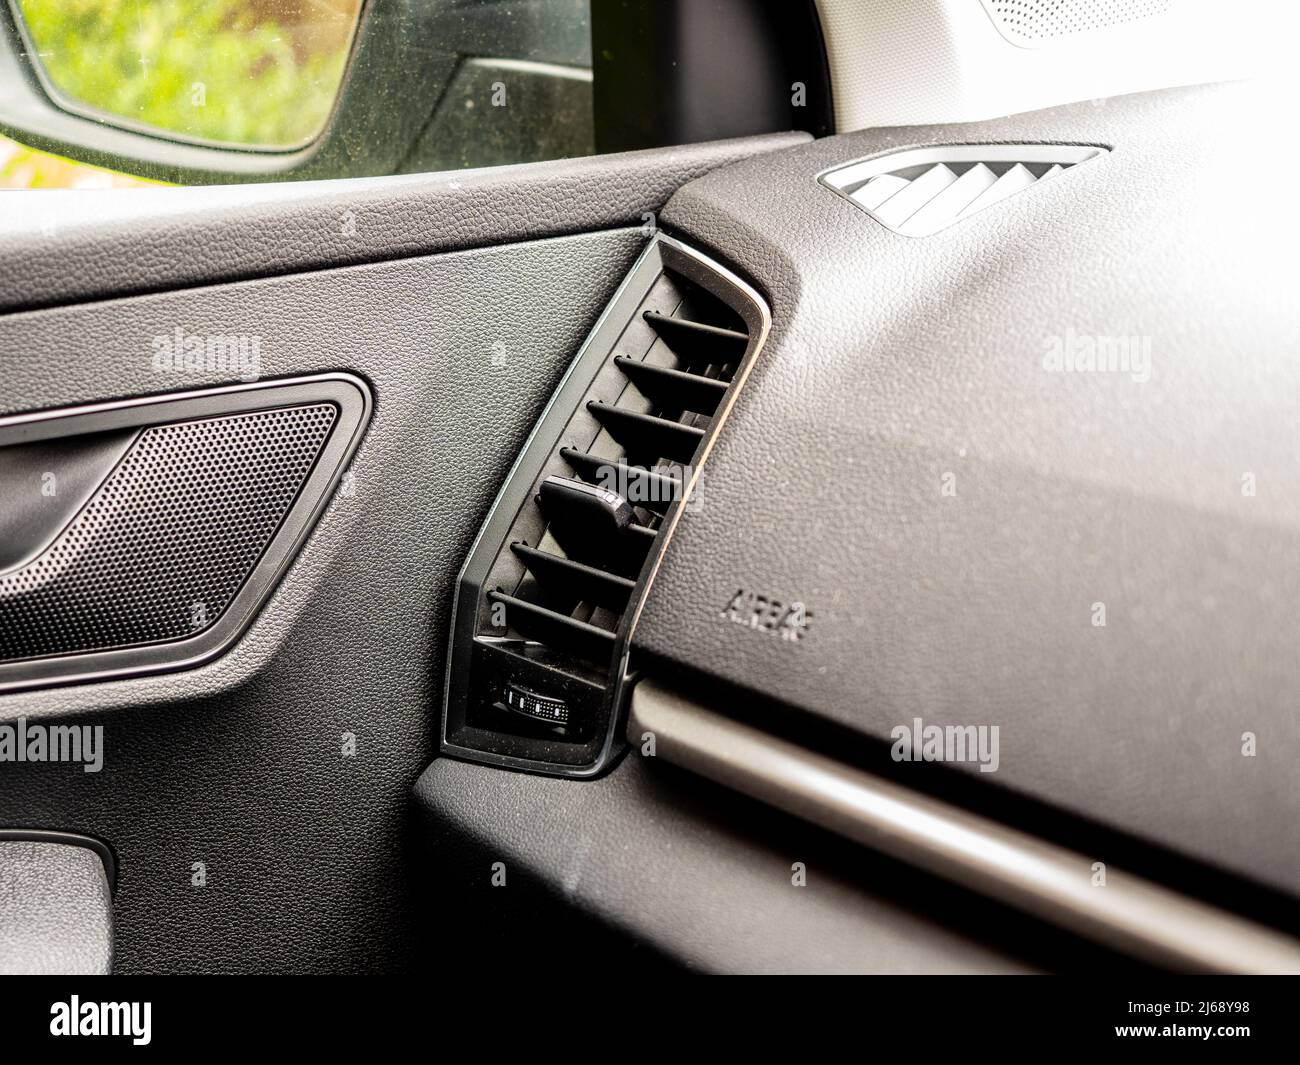 Selected Focus Adustable Air conditioning , ventilation and fresh air outlet in modern car Interior Stock Photo